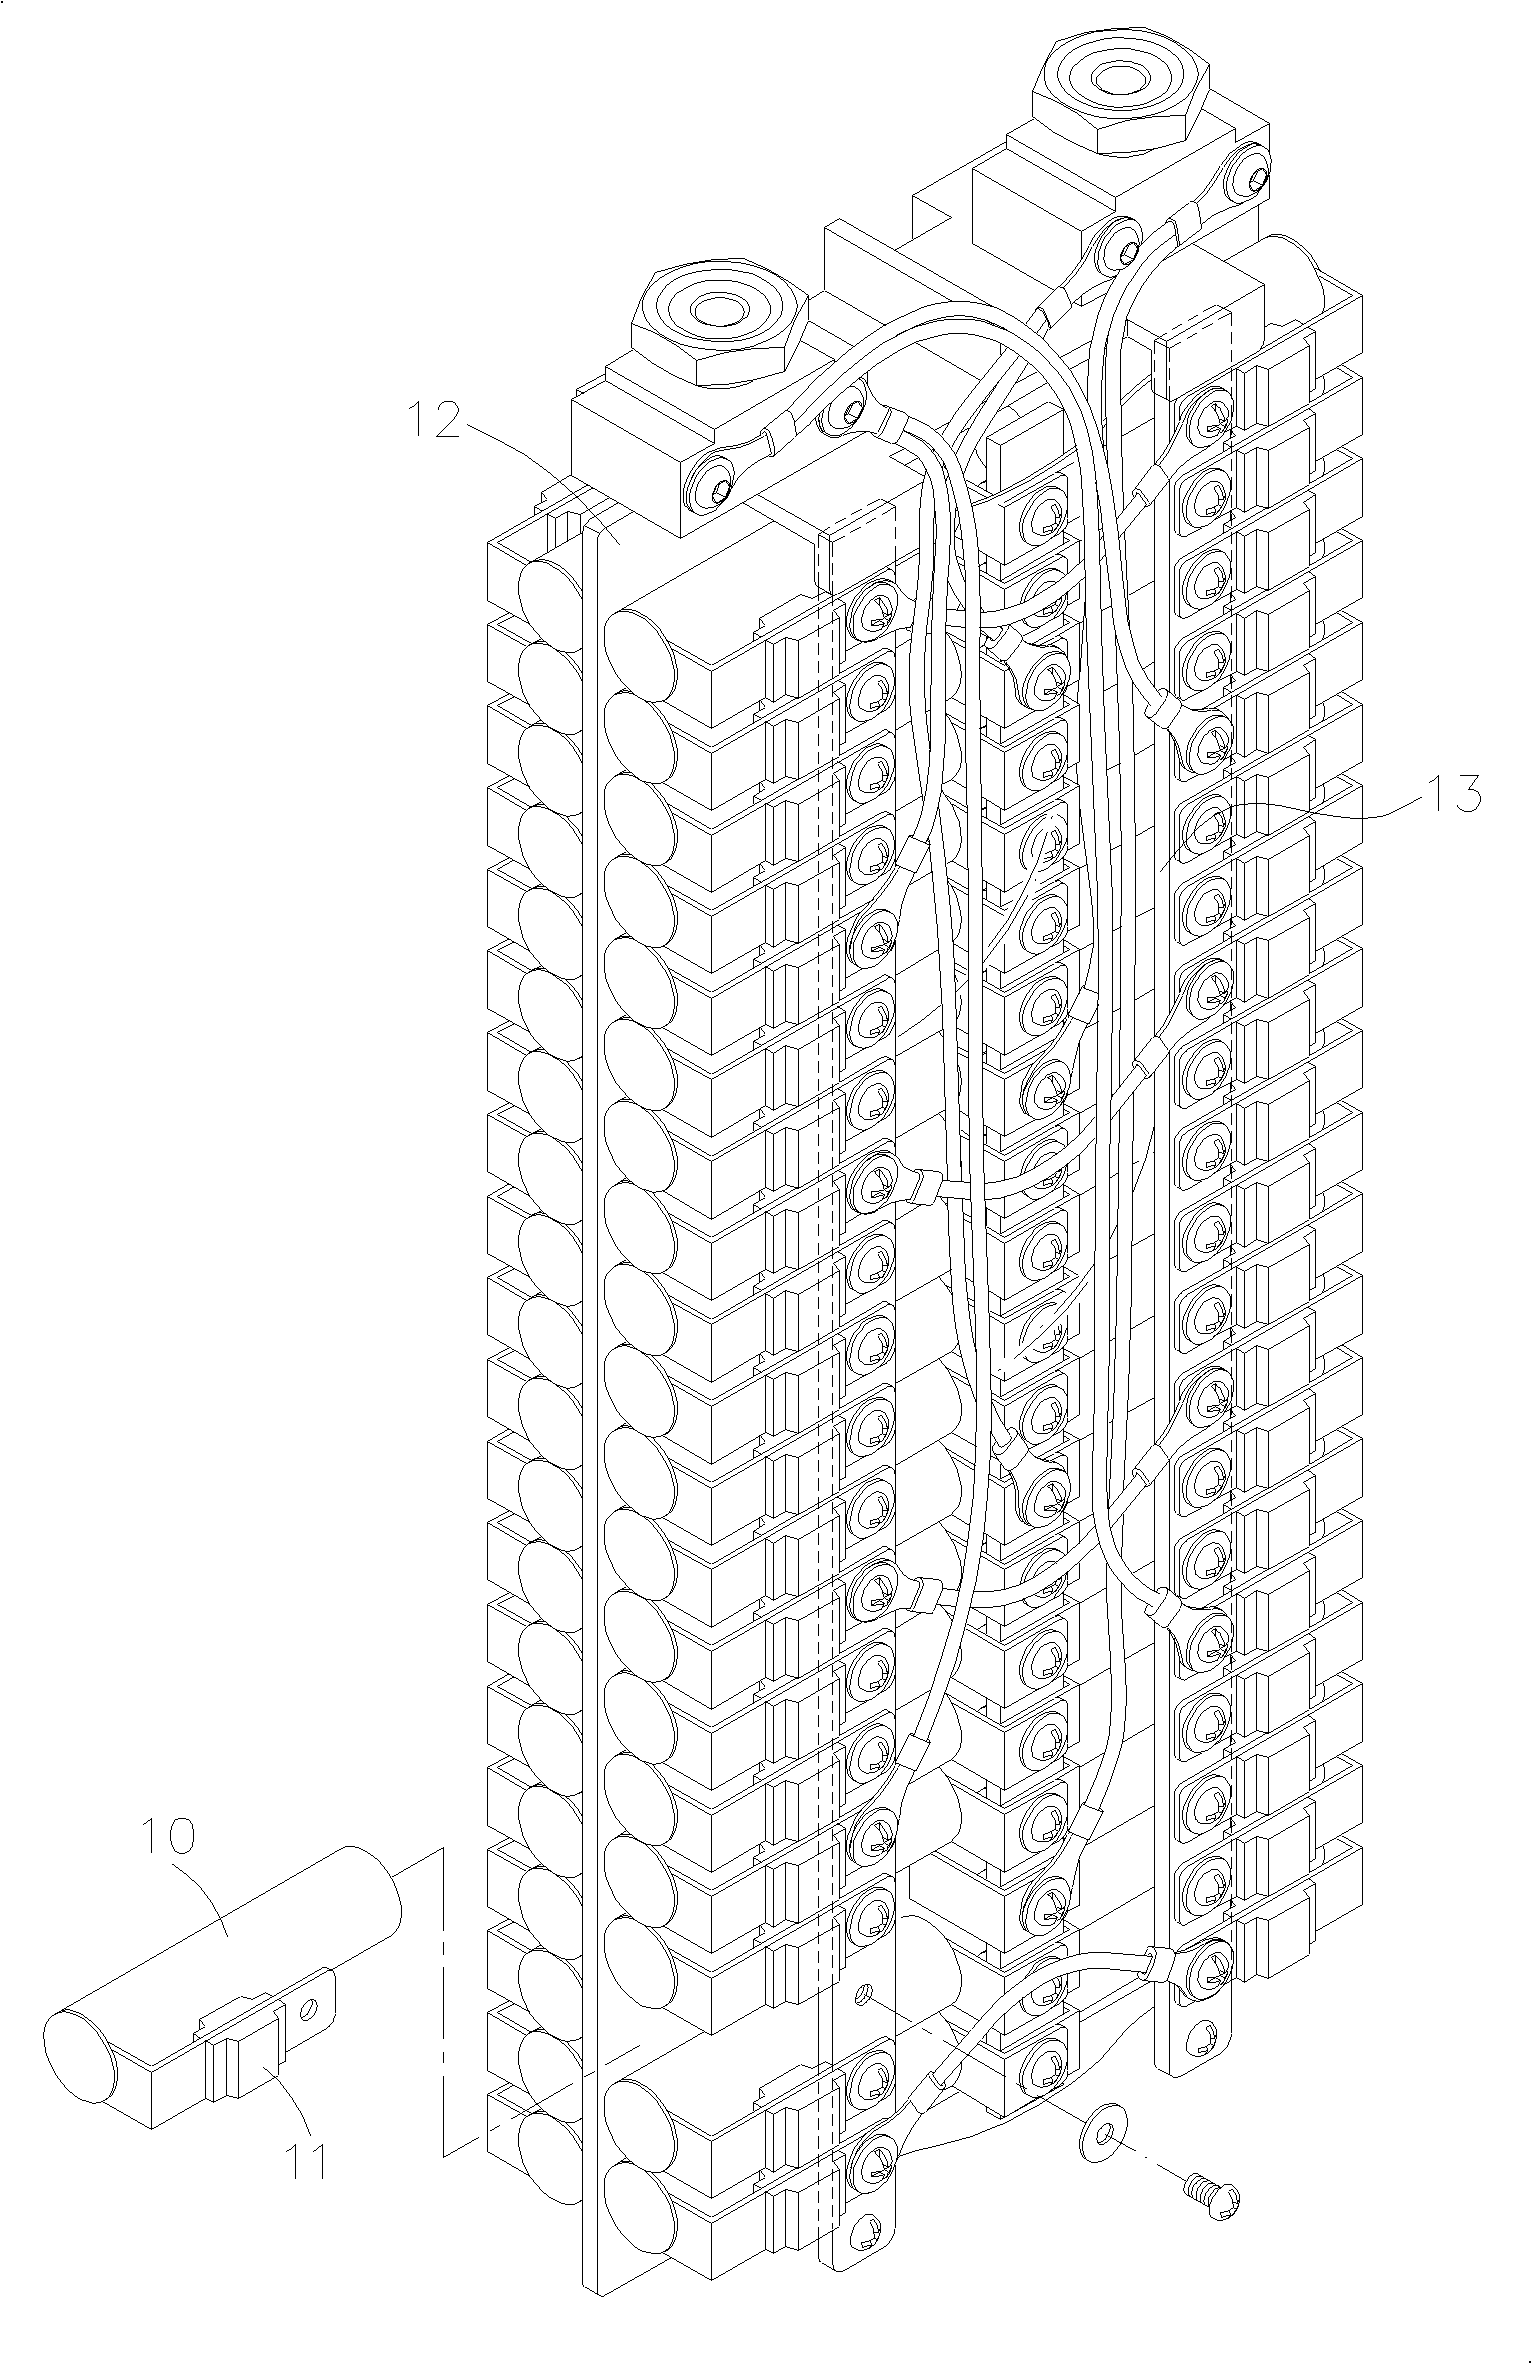 Safety power supply device of set battery